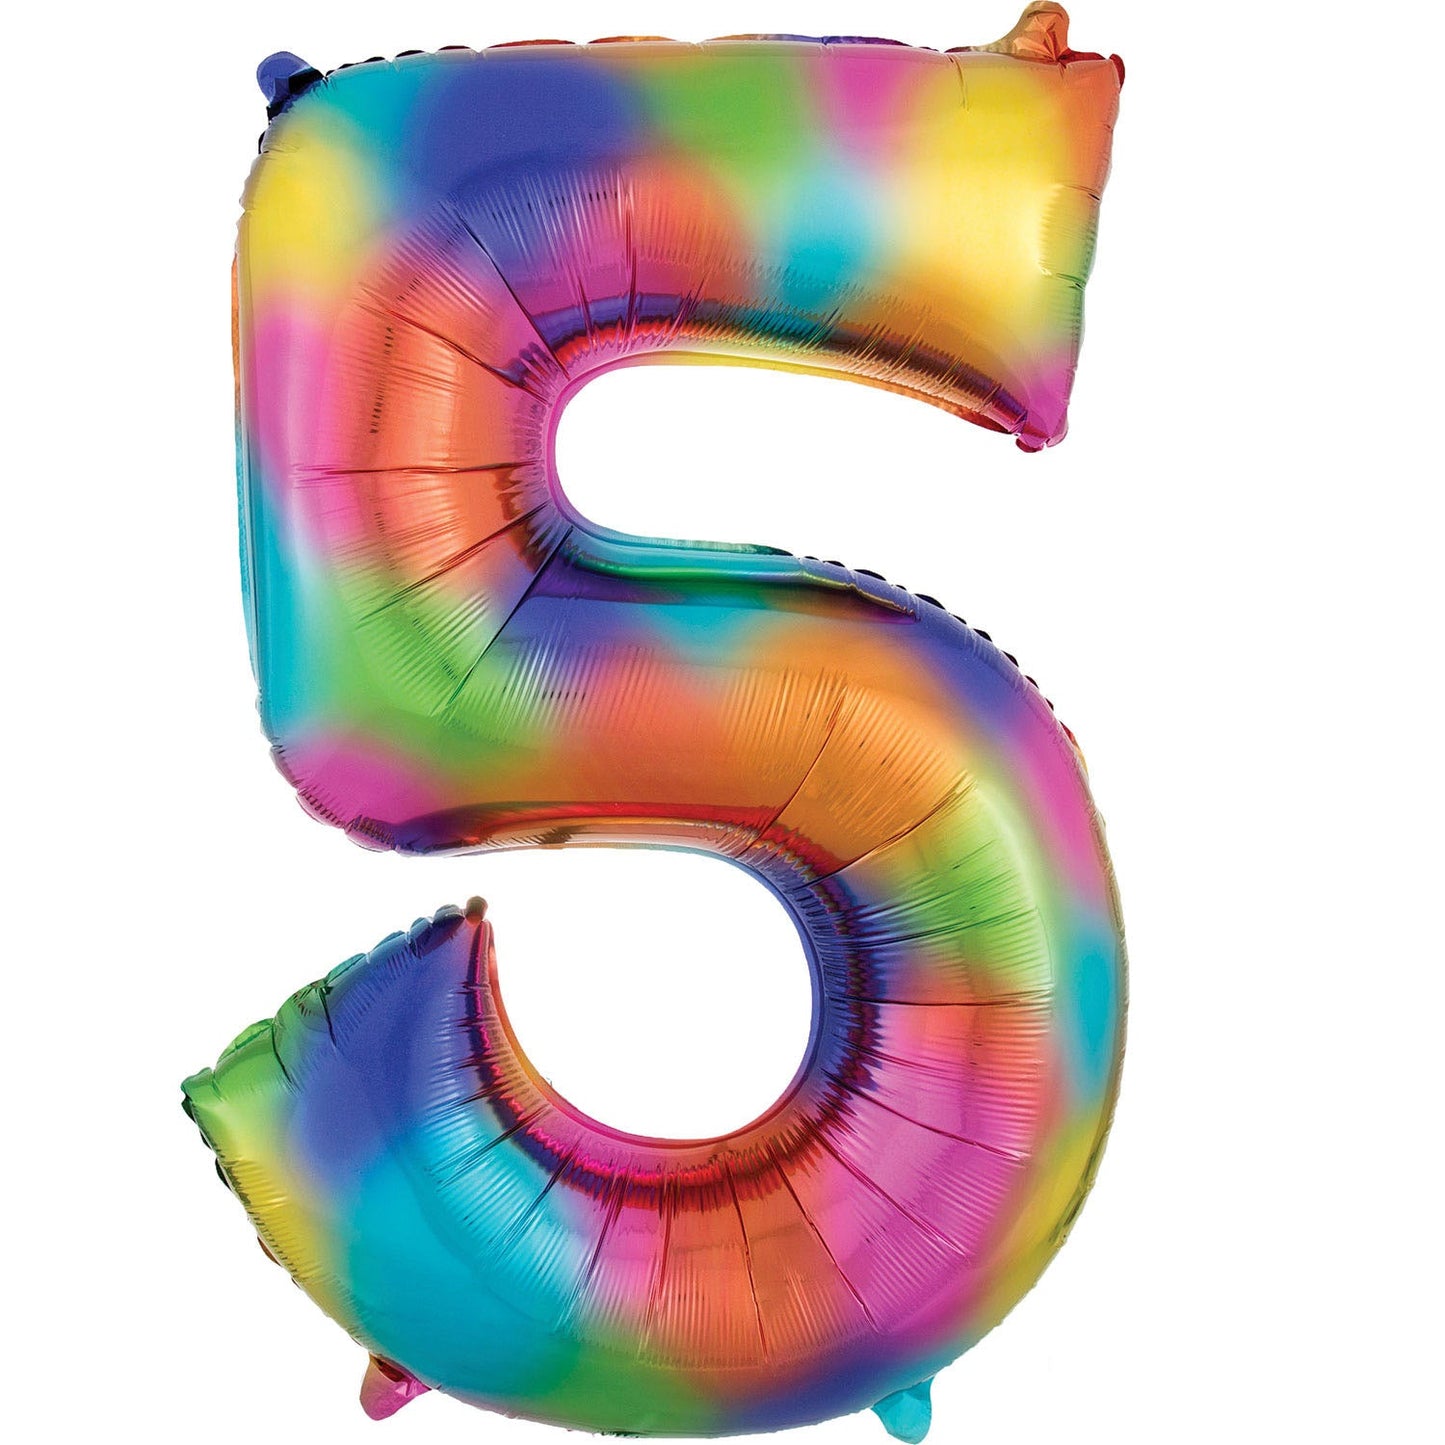 Rainbow Splash Supershape Number 5 Foil Balloon 83cm (33in) height by 58cm (23in) width Balloon is sold uninflated. Can be inflated with air or helium.